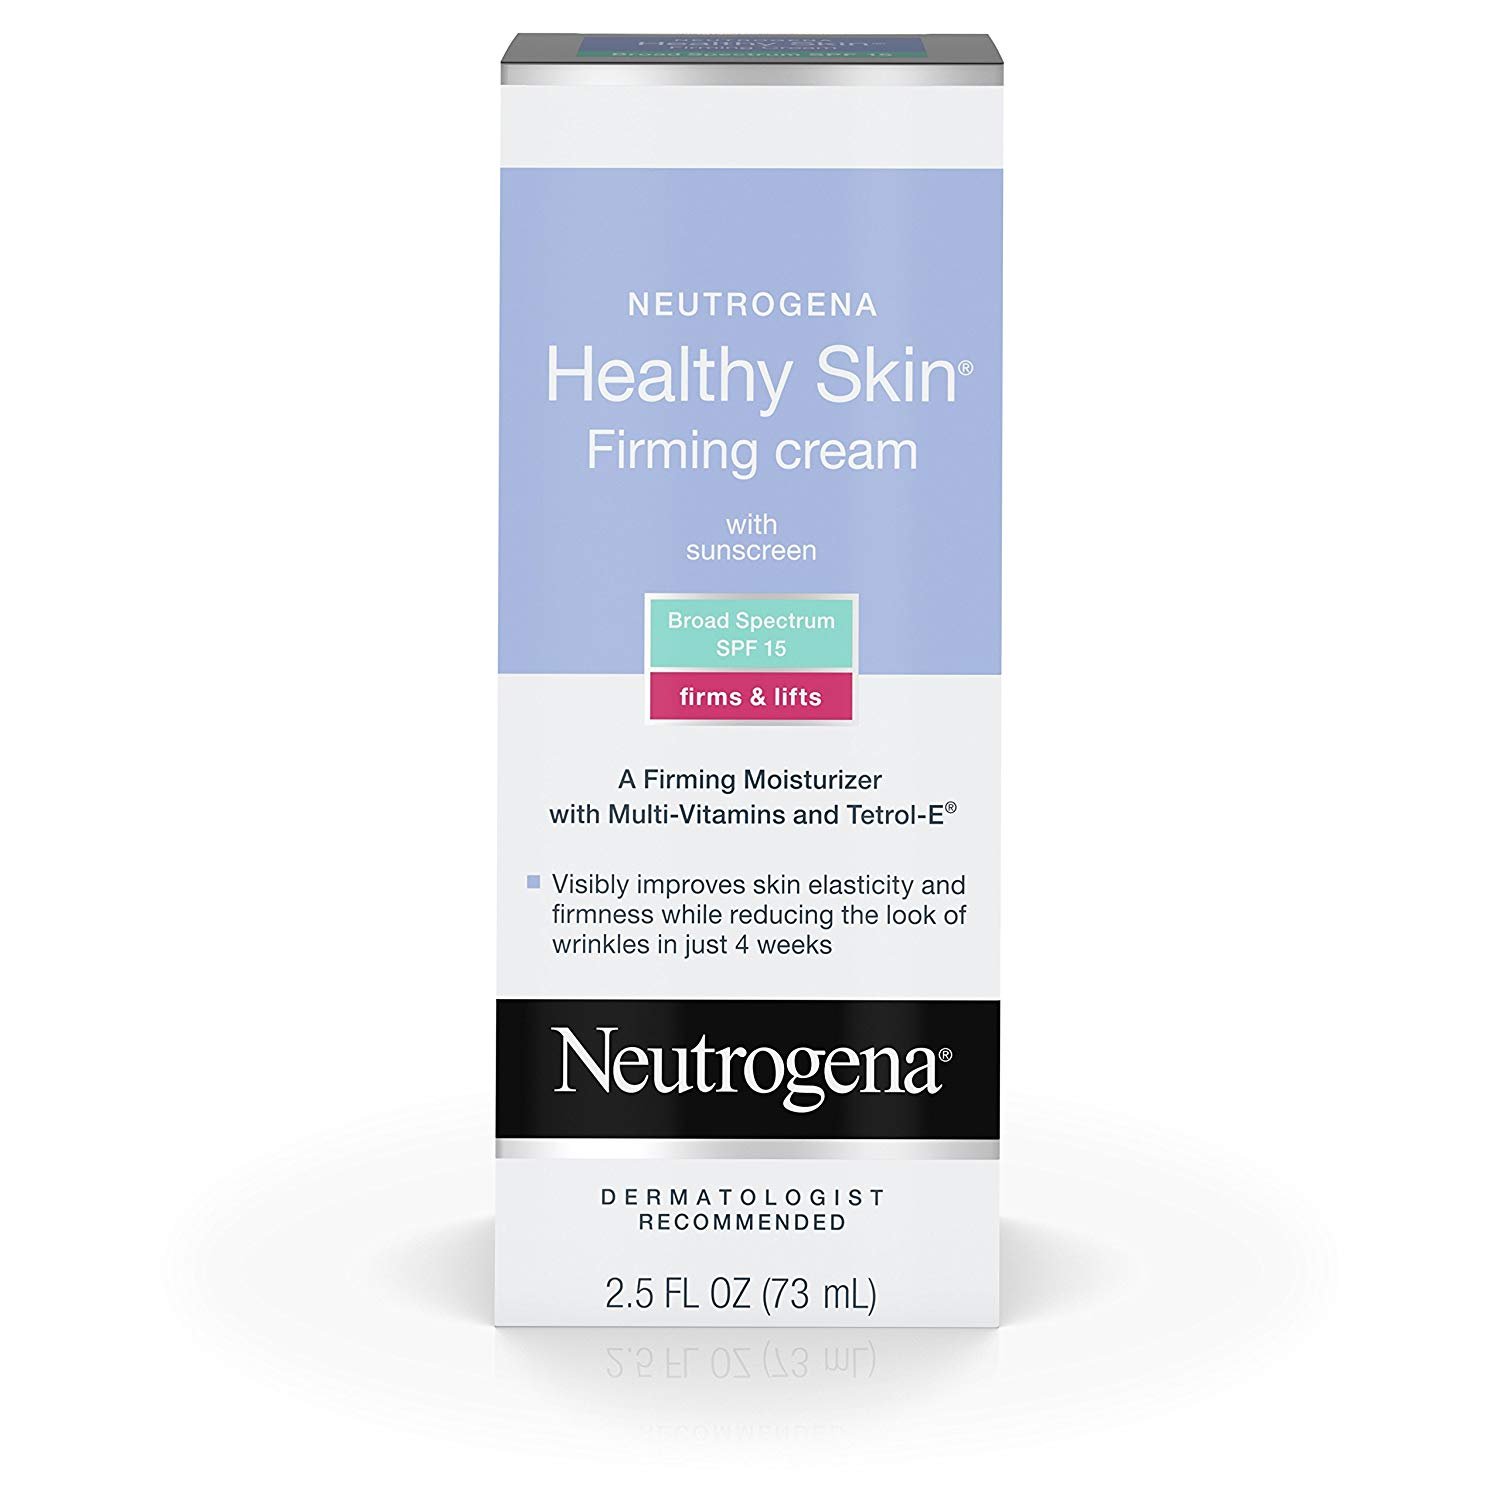 Neutrogena Healthy Skin Firming Cream with SPF 15 Sunscreen & Tetrol-E, Hypoallergenic & Non-Comedogenic Anti-Wrinkle Face Cream to Visibly Firm, Tighten & Lift Skin, 2.5 fl. oz - image 1 of 10